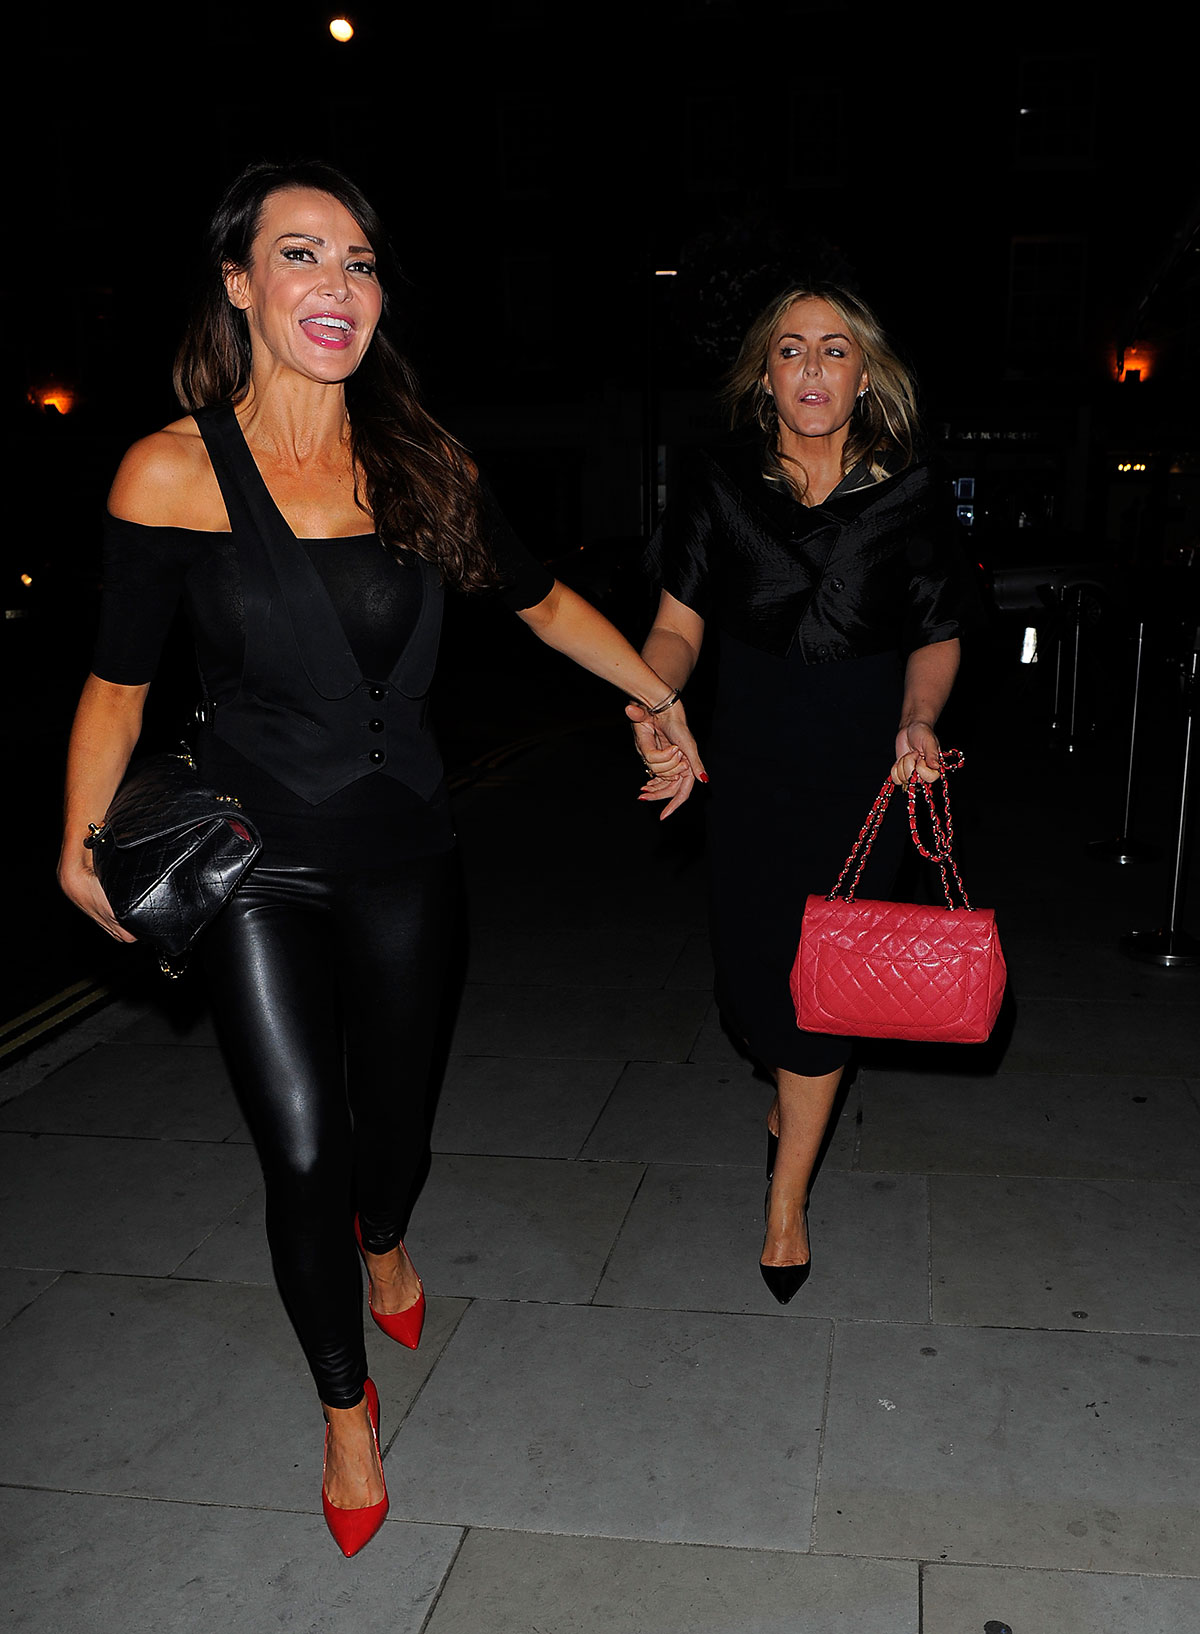 Lizzie Cundy at The Chiltern Firehouse in London